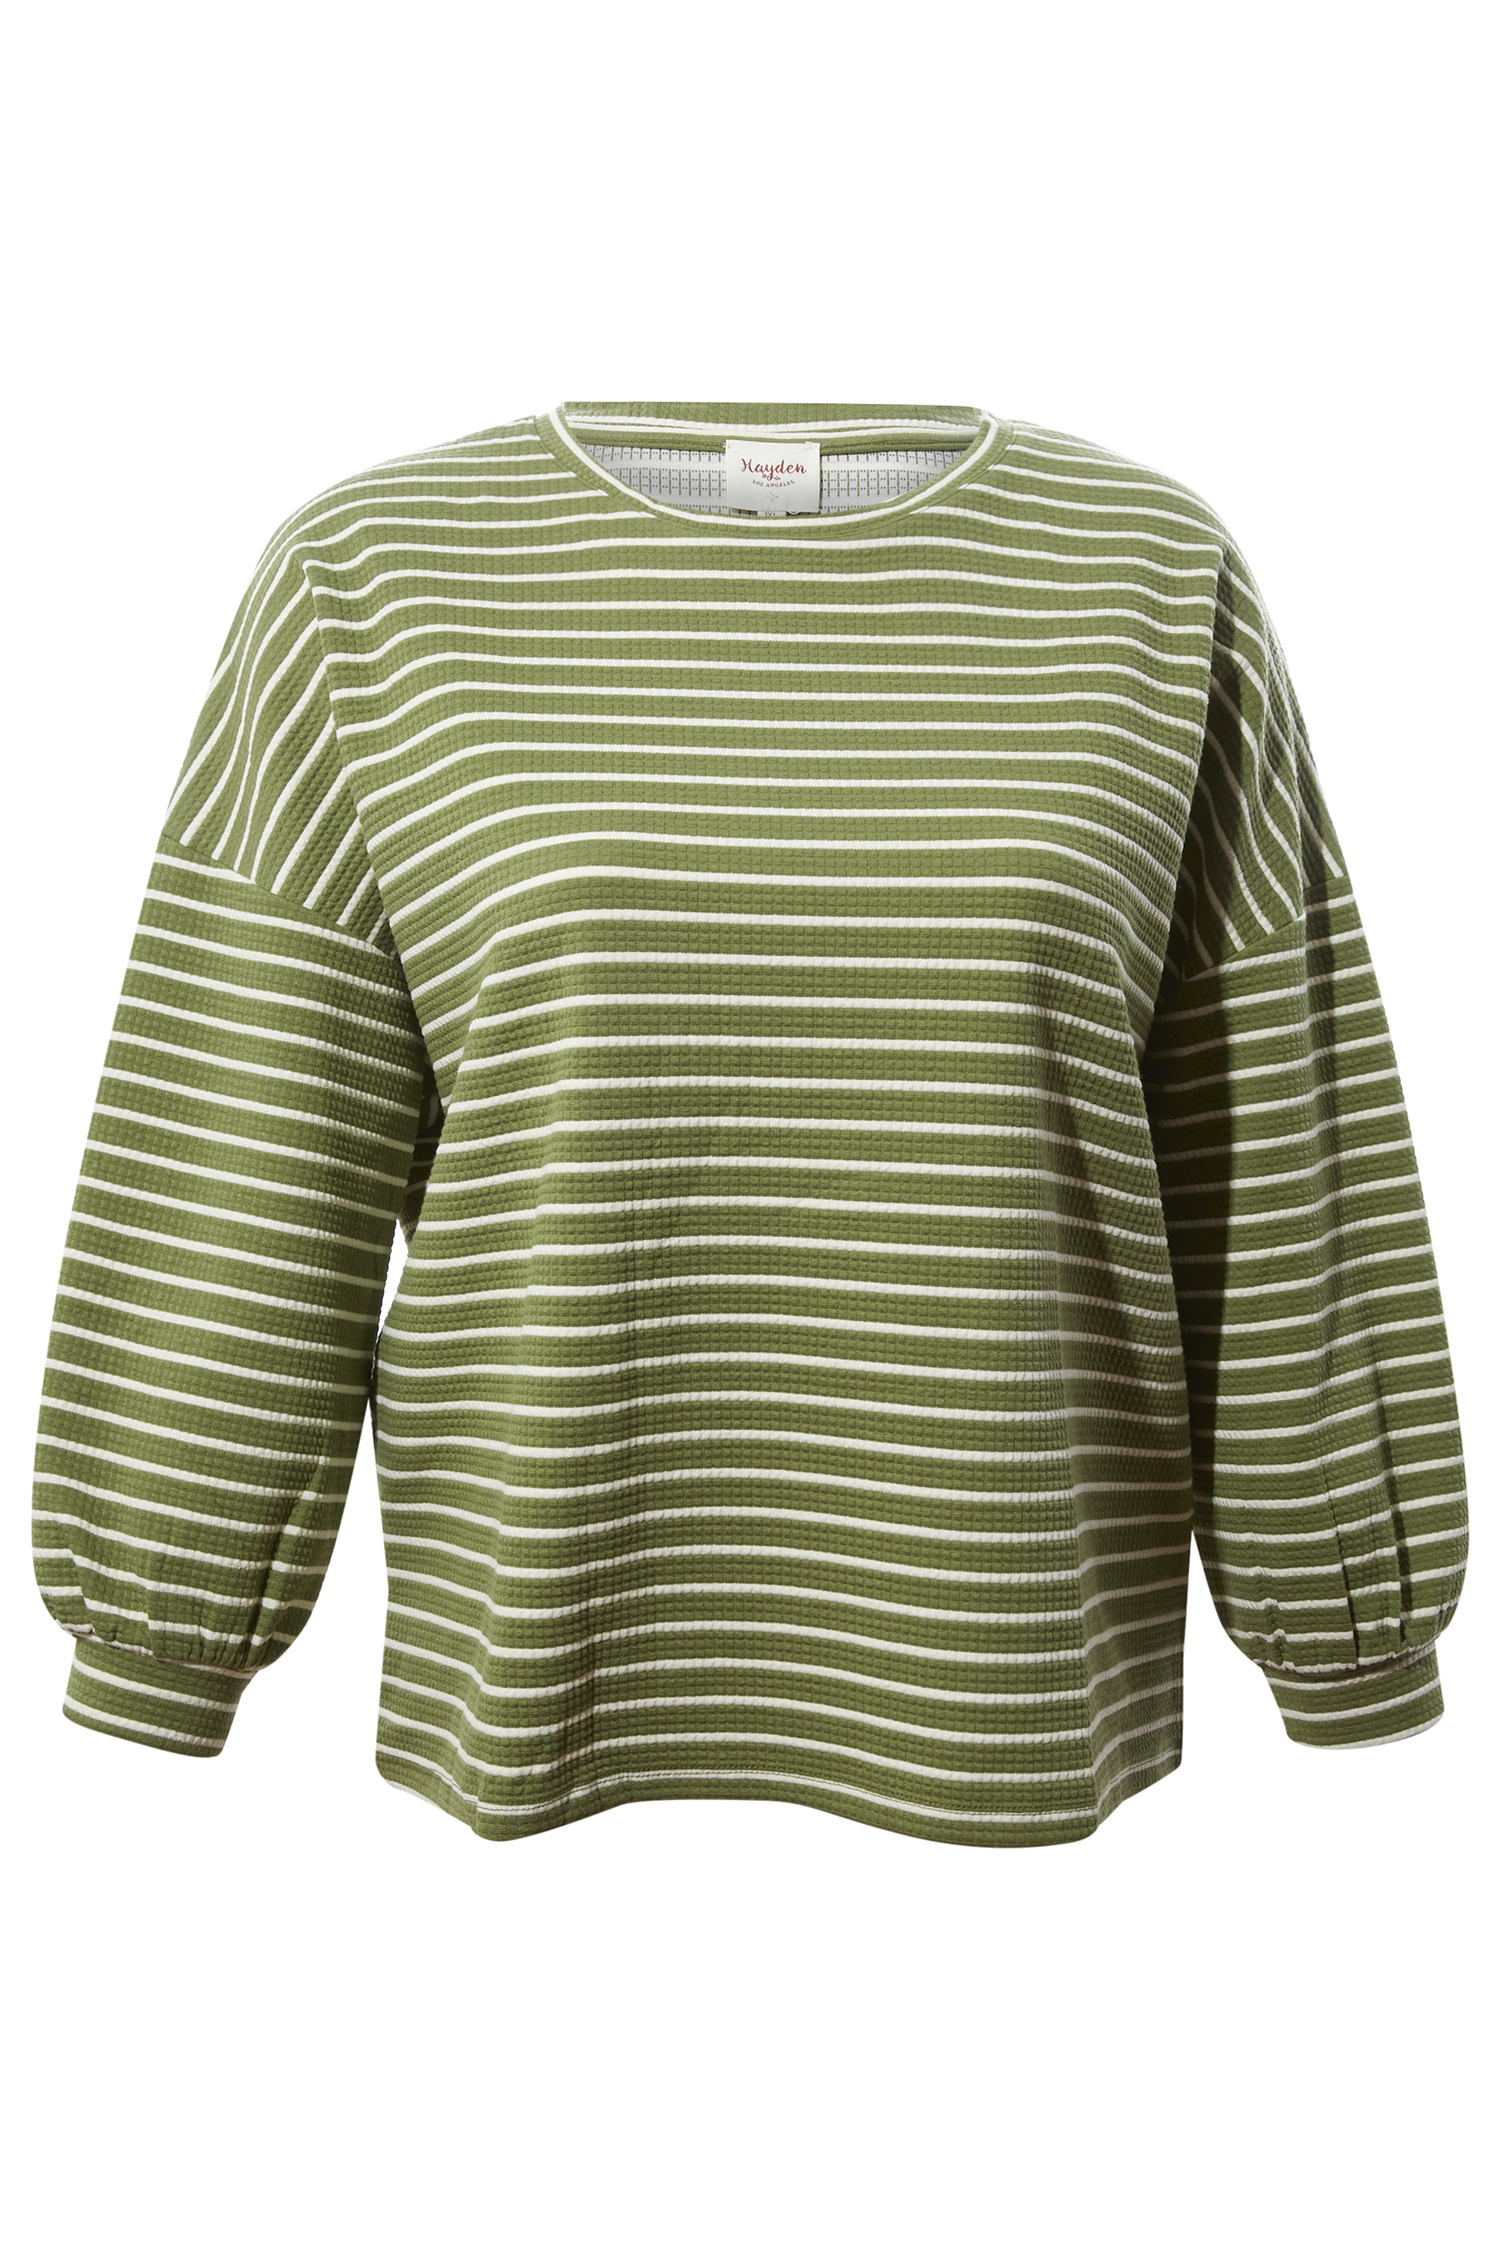 Striped | DAILYLOOK 3X T-Shirt 1X in - Sleeve Long Sage